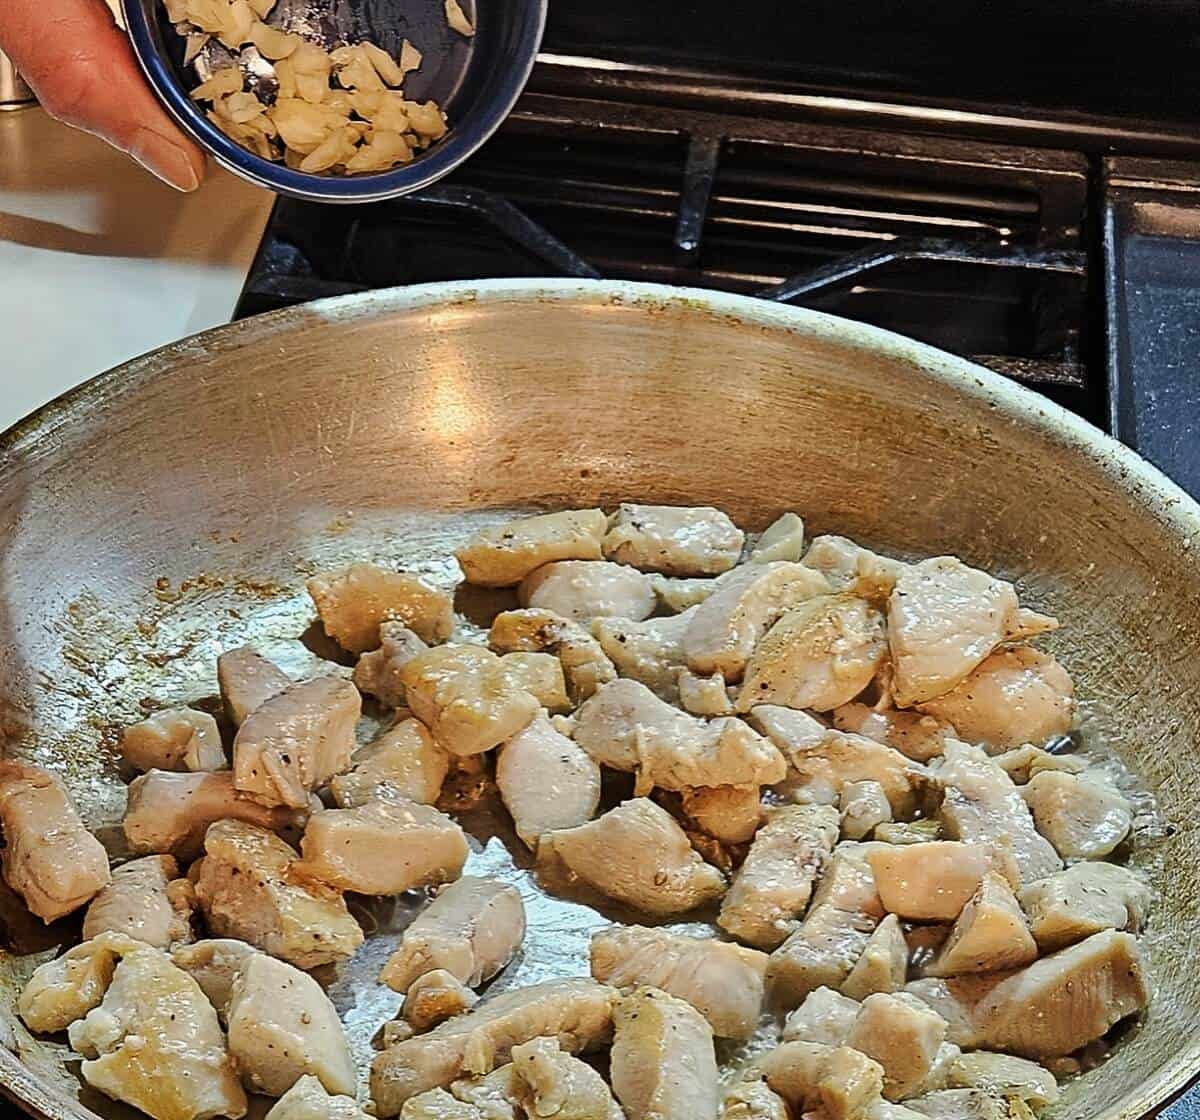 seared chicken breast pieces in a skillet with a ramekin of minced garlic being dropped in.